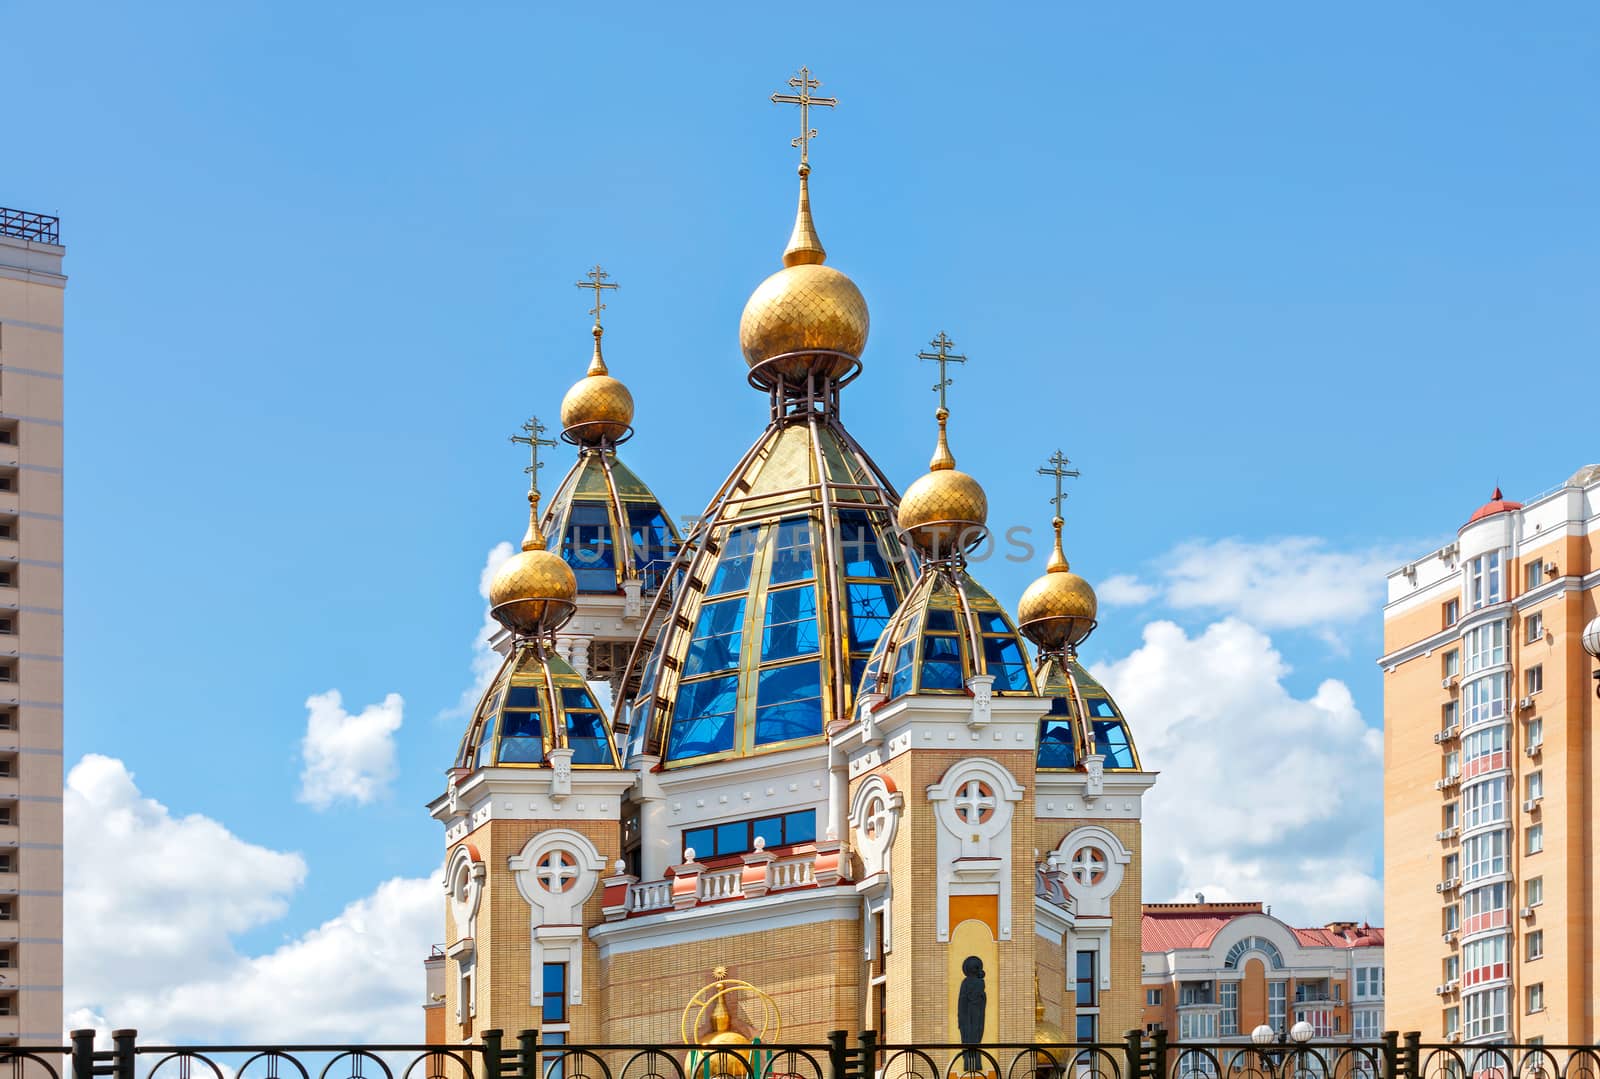 Golden domes of a Christian church on glass roof facades among an urban residential area against a blue cloudy sky.